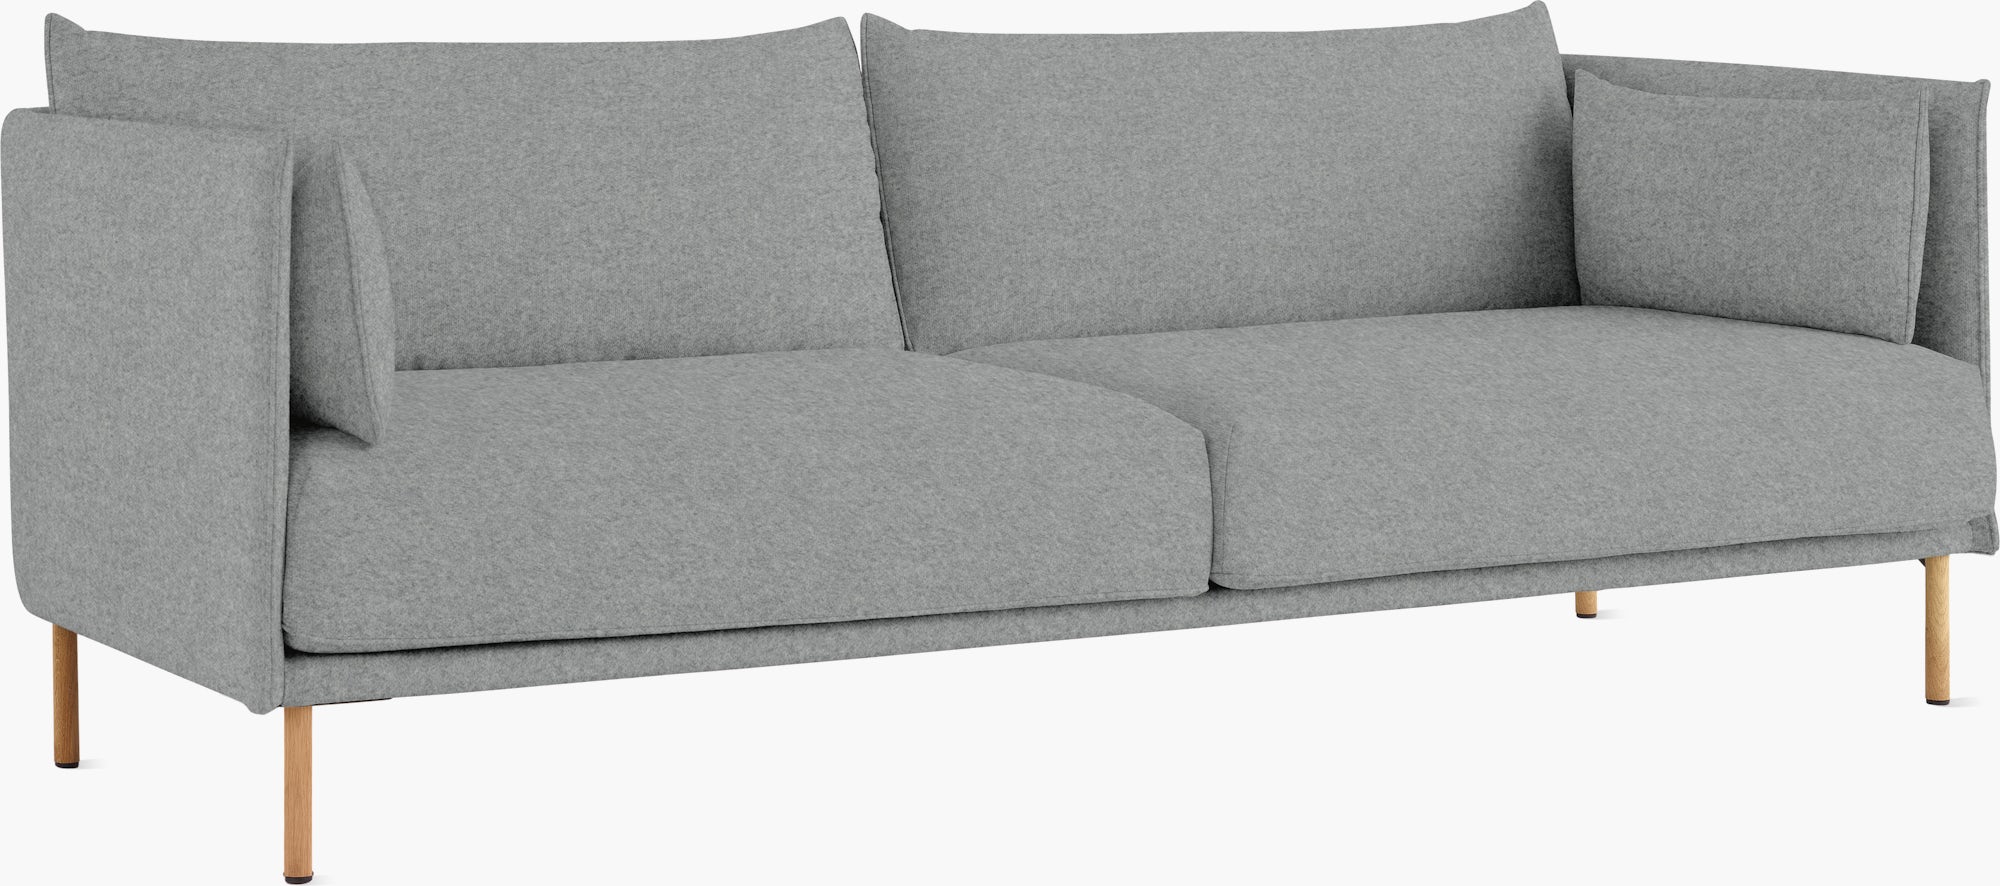 Someday Be confused eruption Silhouette Three Seat Sofa - Design Within Reach